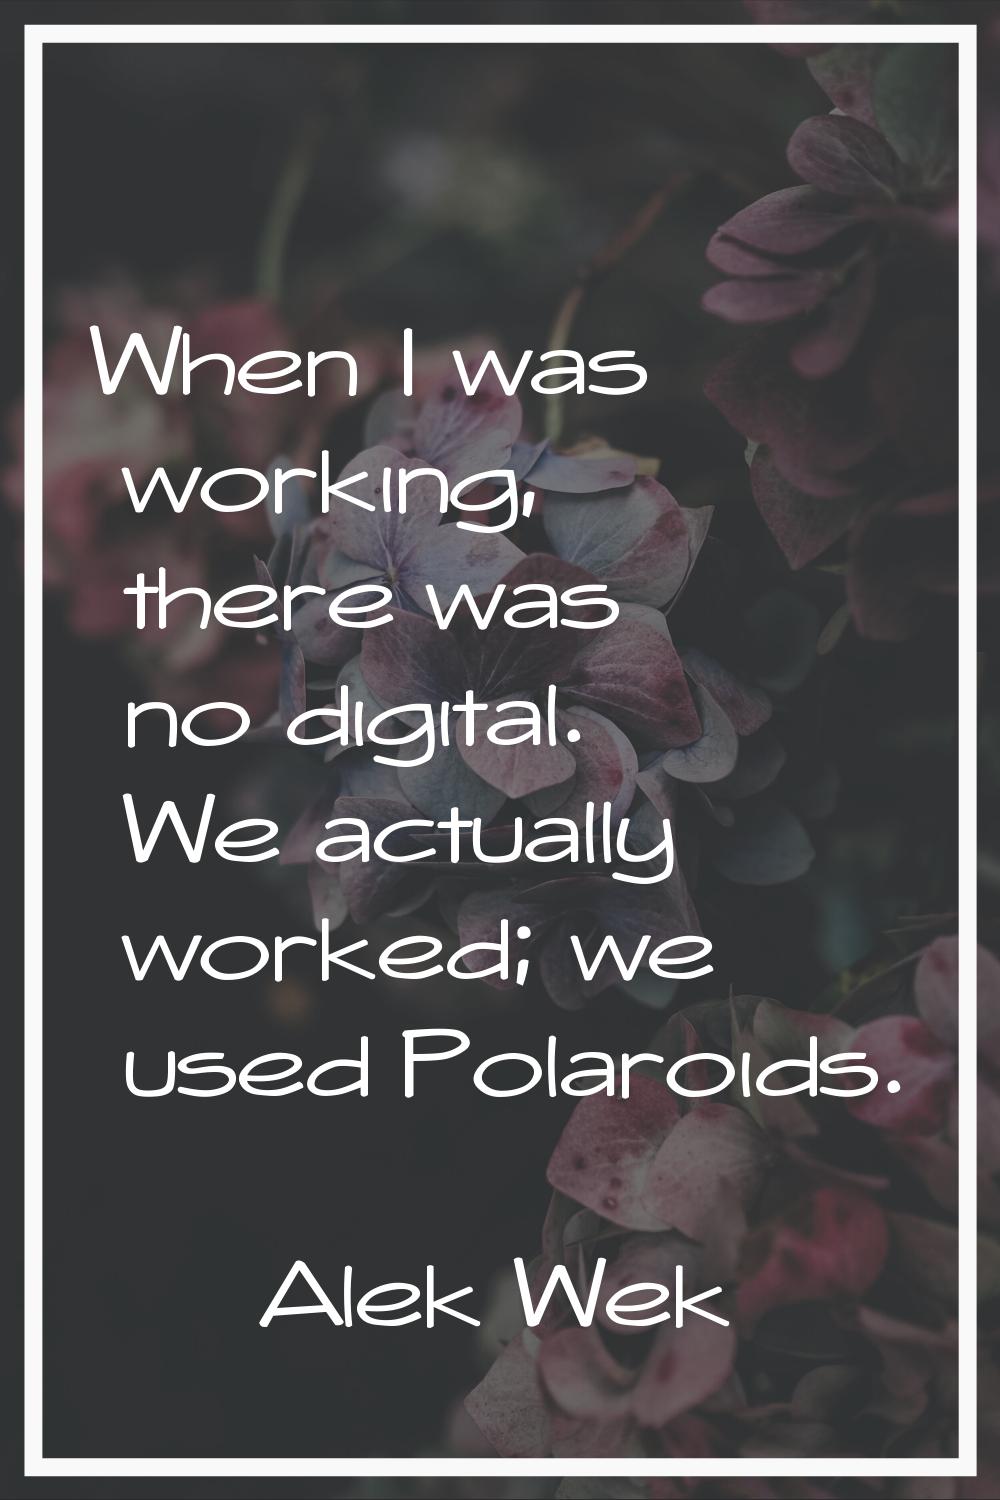 When I was working, there was no digital. We actually worked; we used Polaroids.